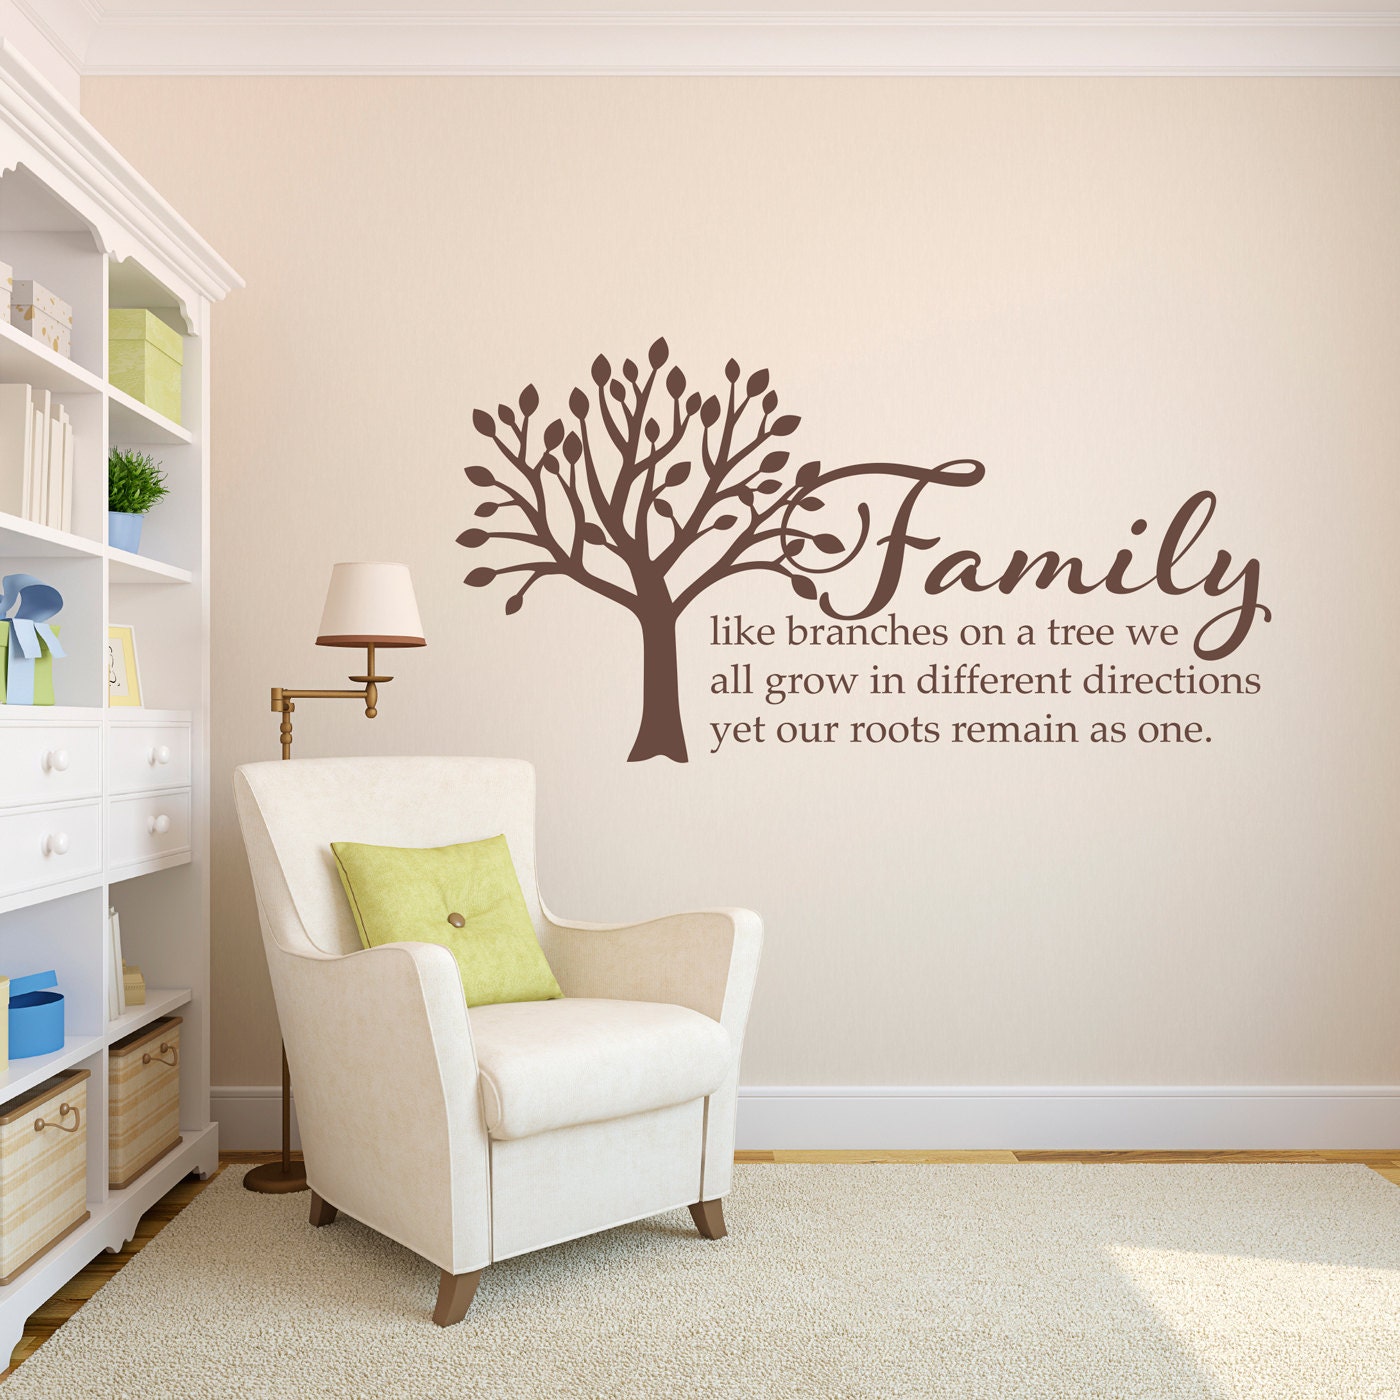 Family Tree Wall Decal - Family like branches on a tree Quote Decal - Living Room Wall Art - Large